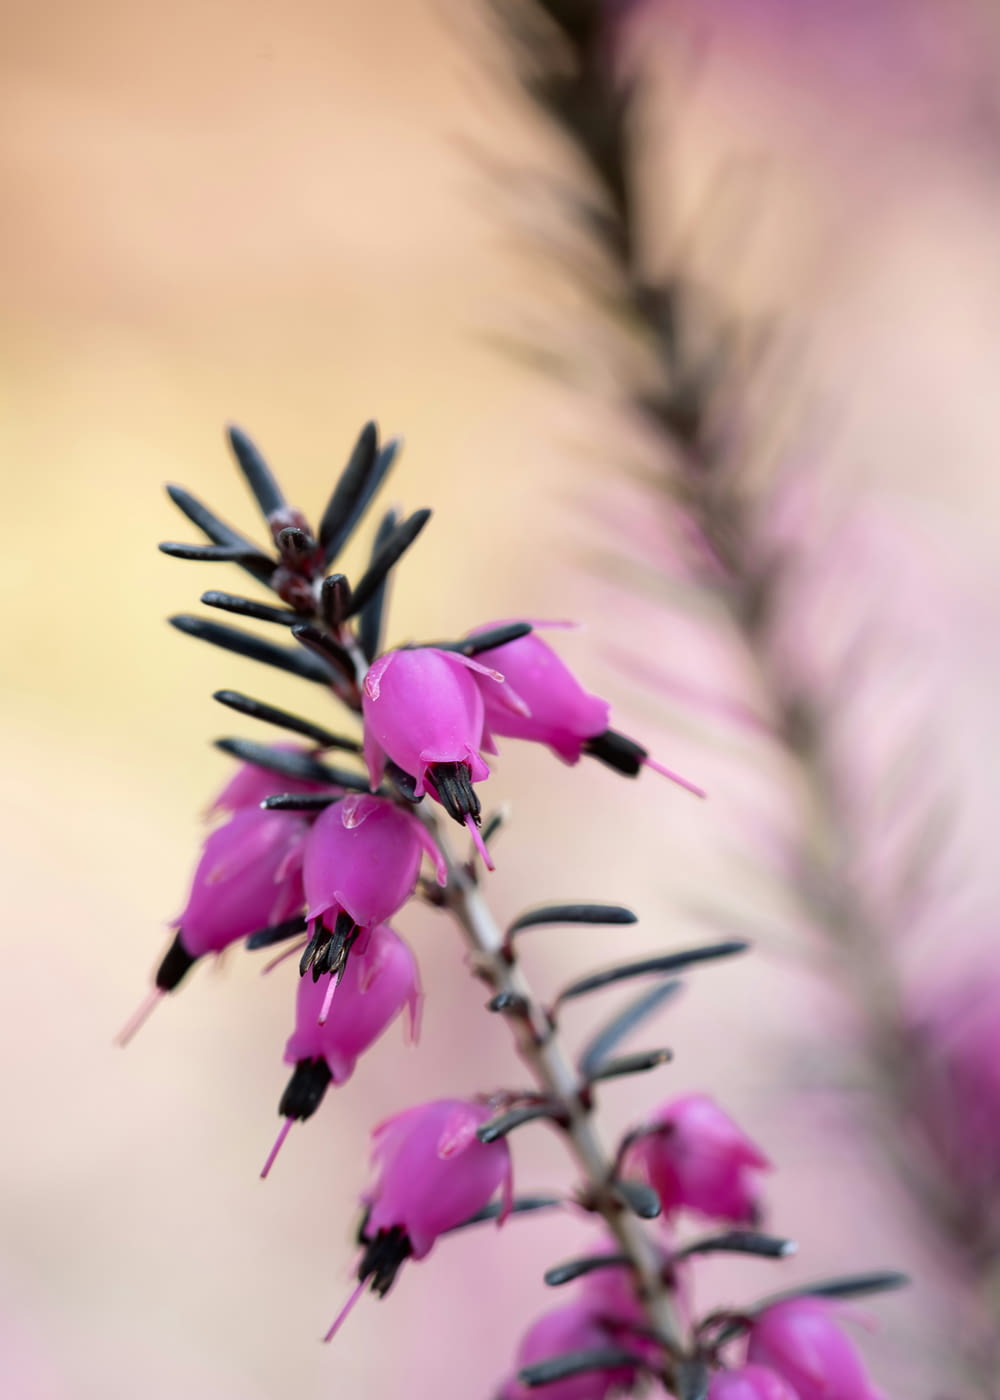 a close up of a plant with purple flowers